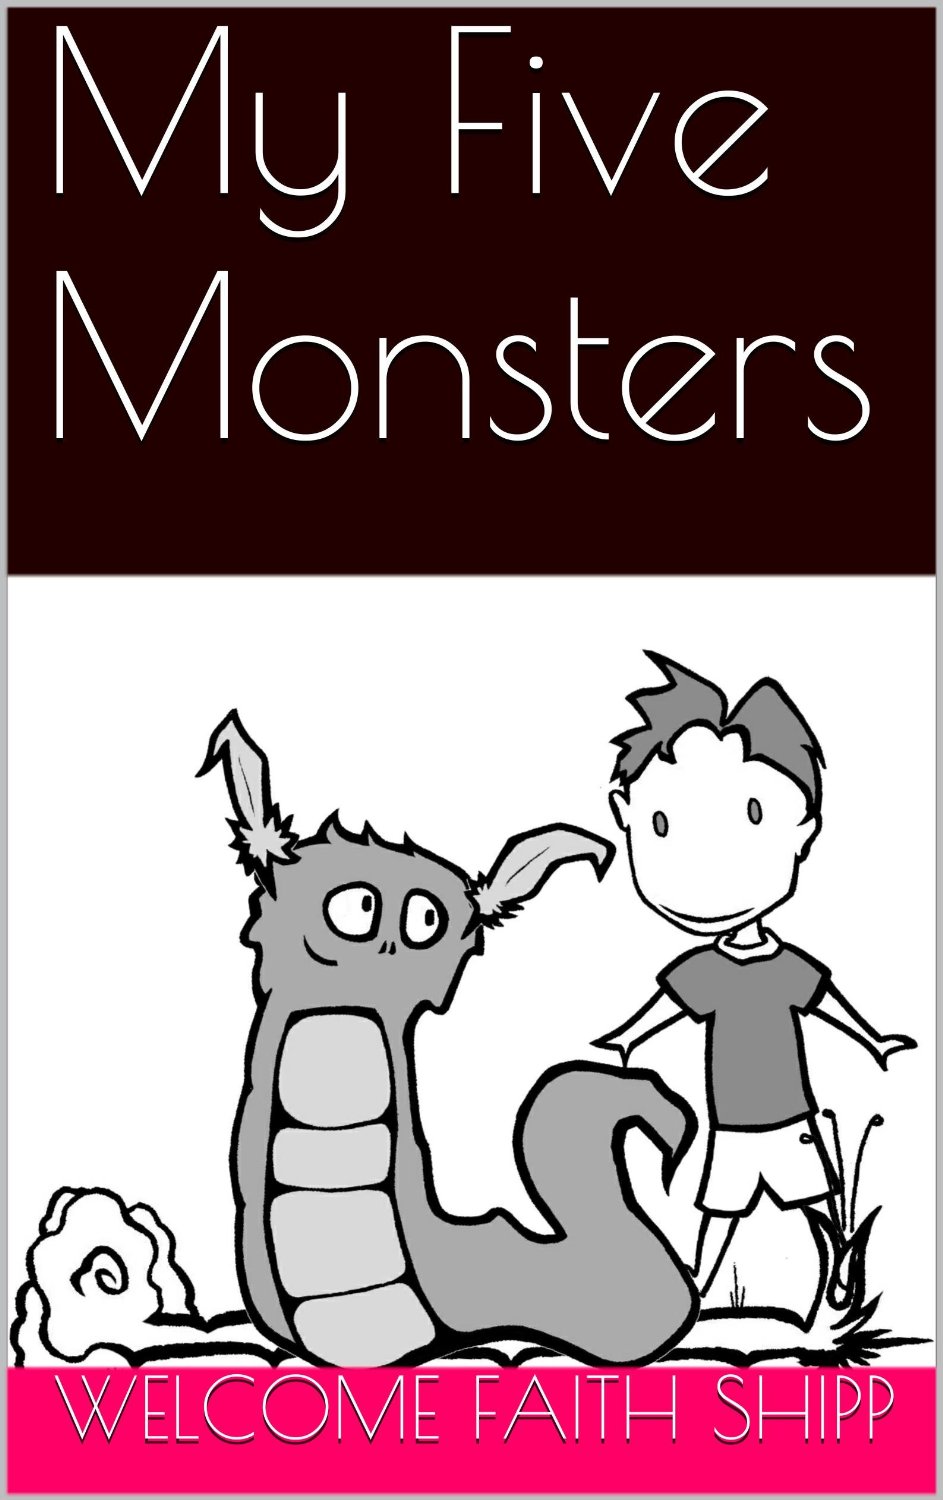 My Five Monsters by Welcome Faith Shipp